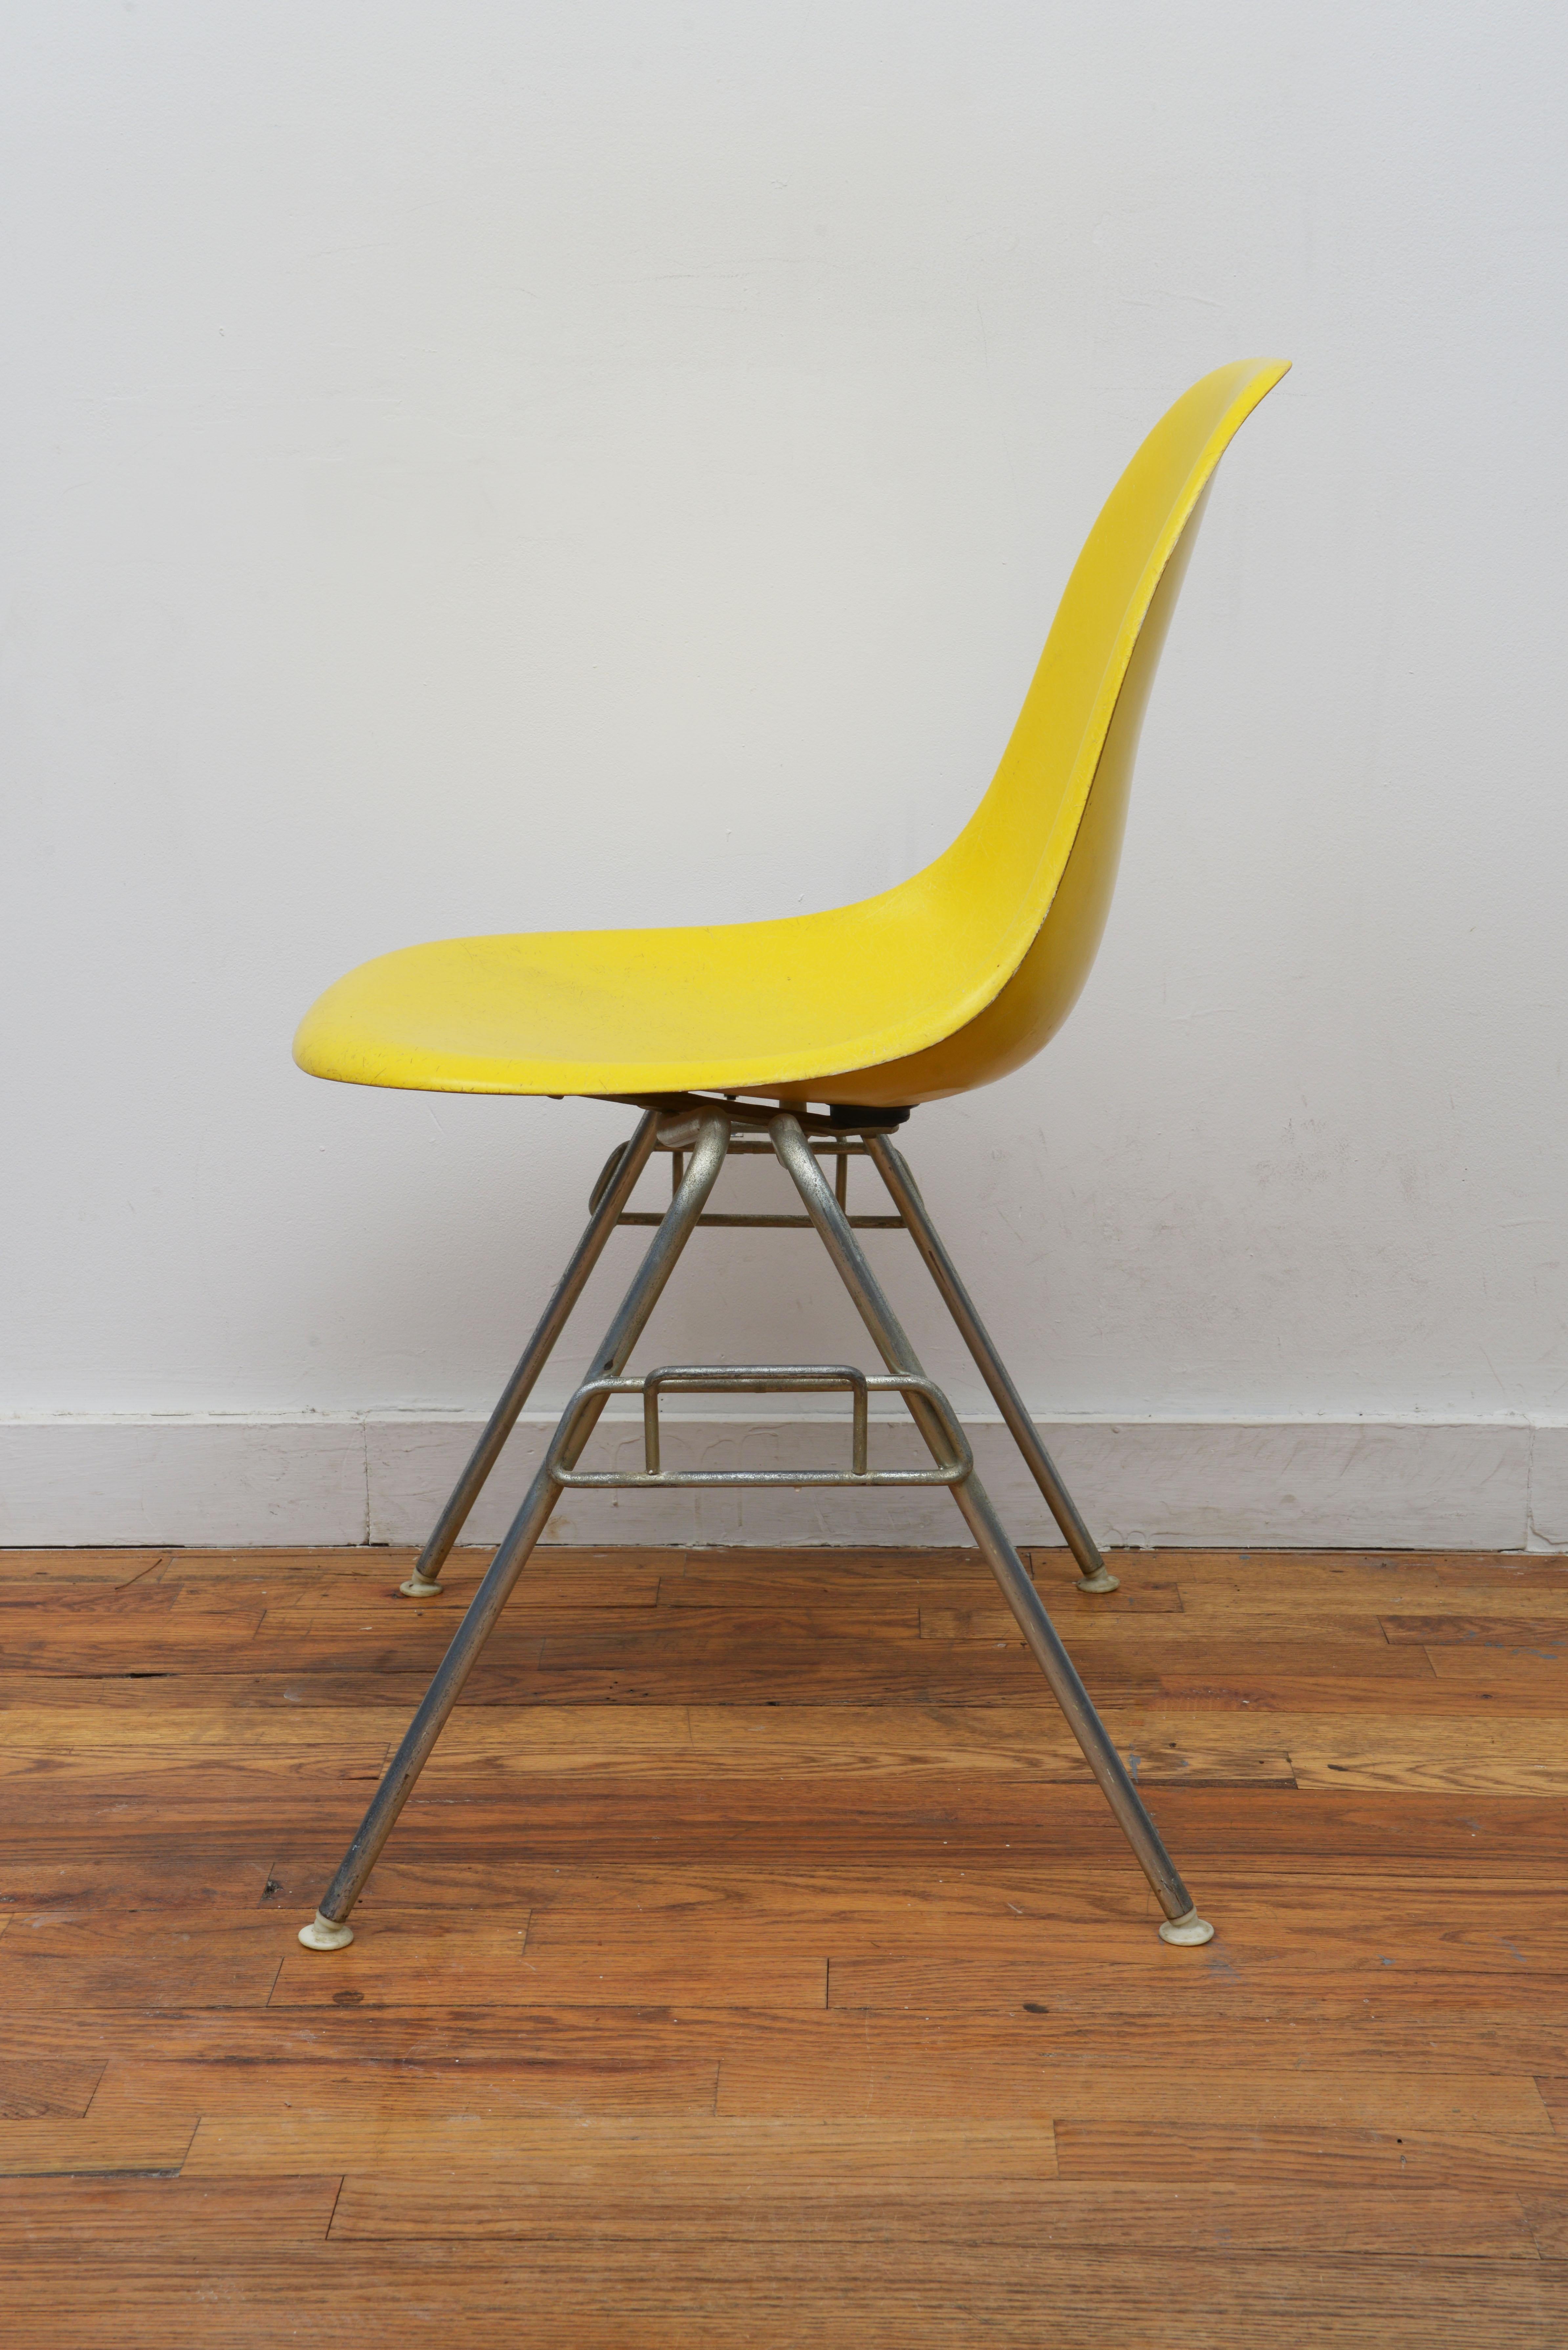 Eames for Herman Miller Yellow DSS fiberglass chair 1950s (Signed with Herman Miller logo on bottom). The chair shows traces of use like some scratches on the shells and tiny damages. This chair is very sturdy and the color is incredible. Most